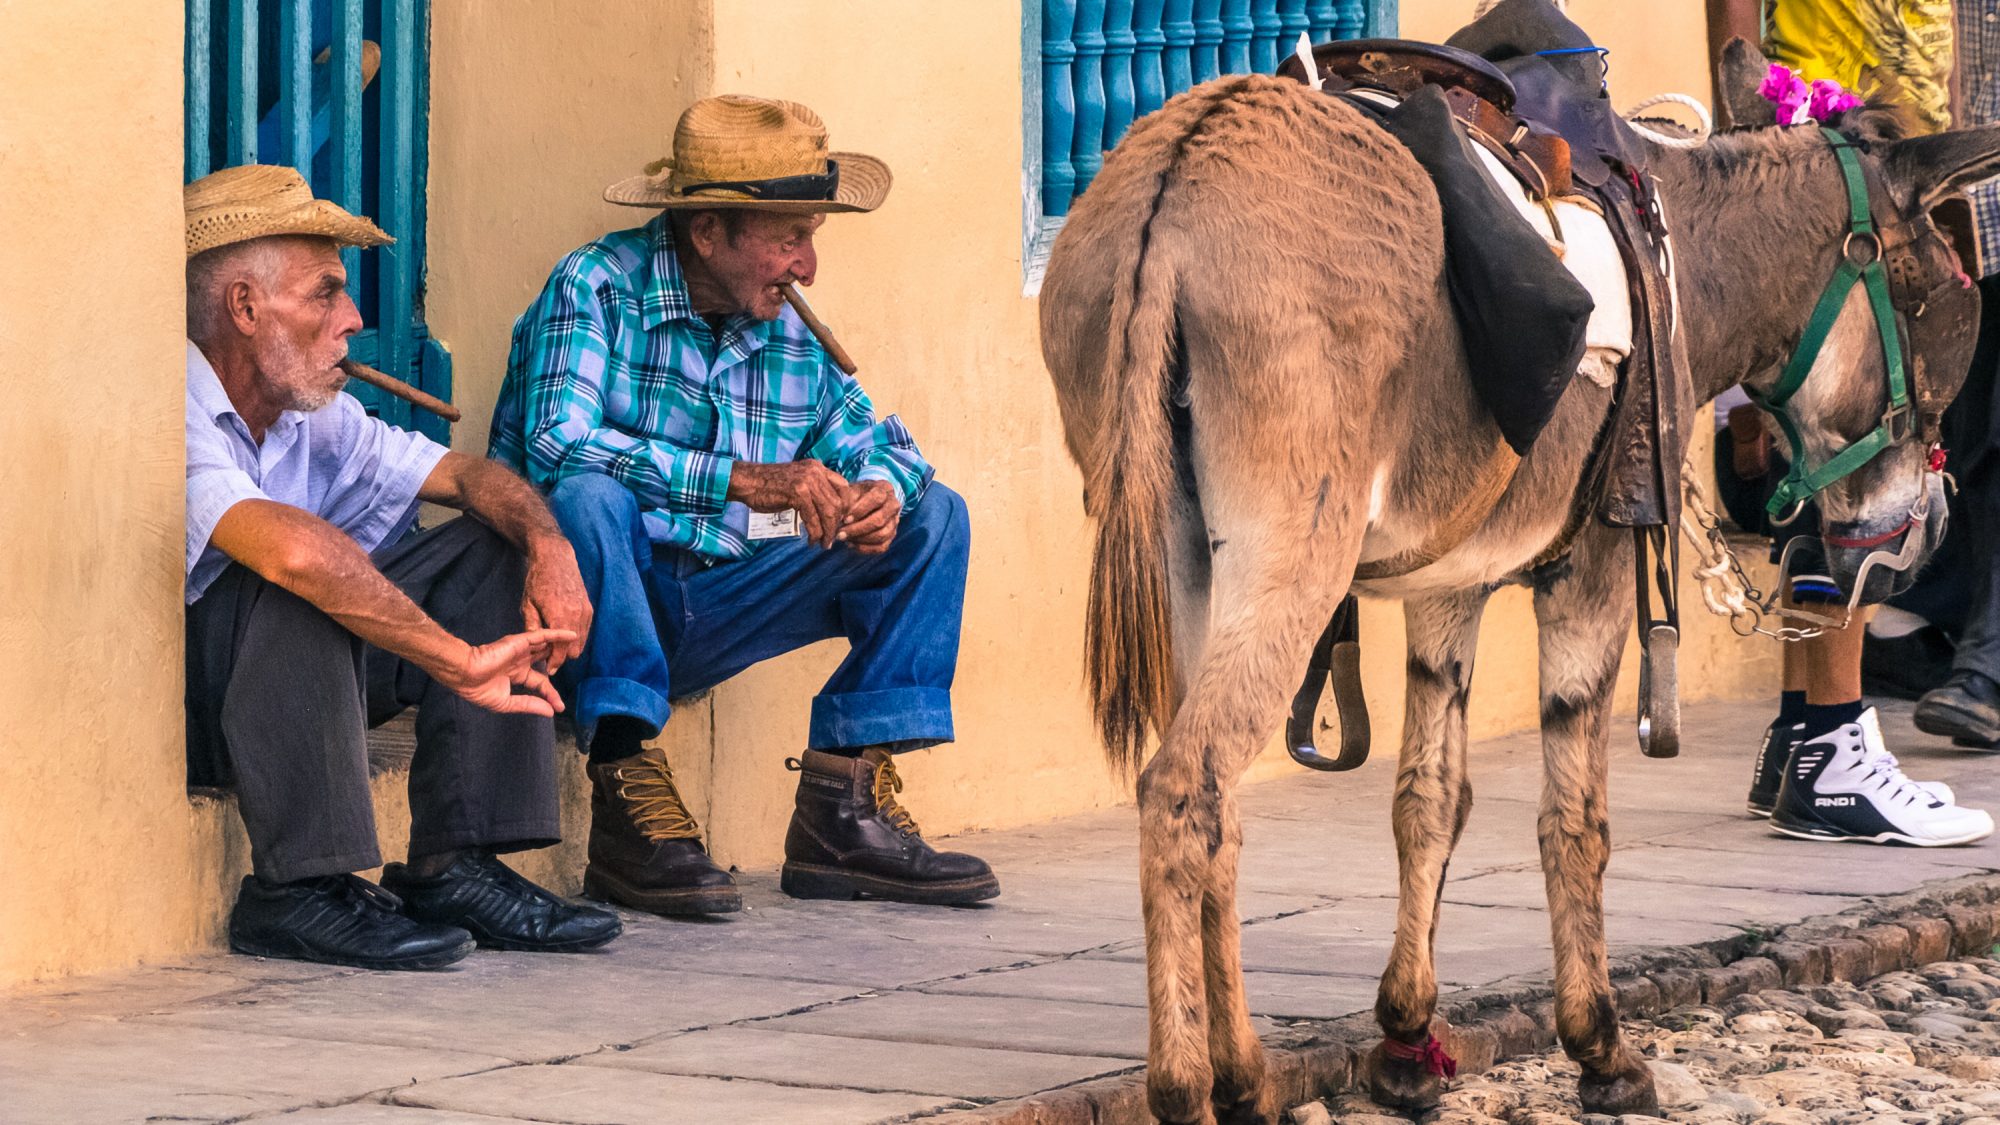 Men with a donkey wait for tourists